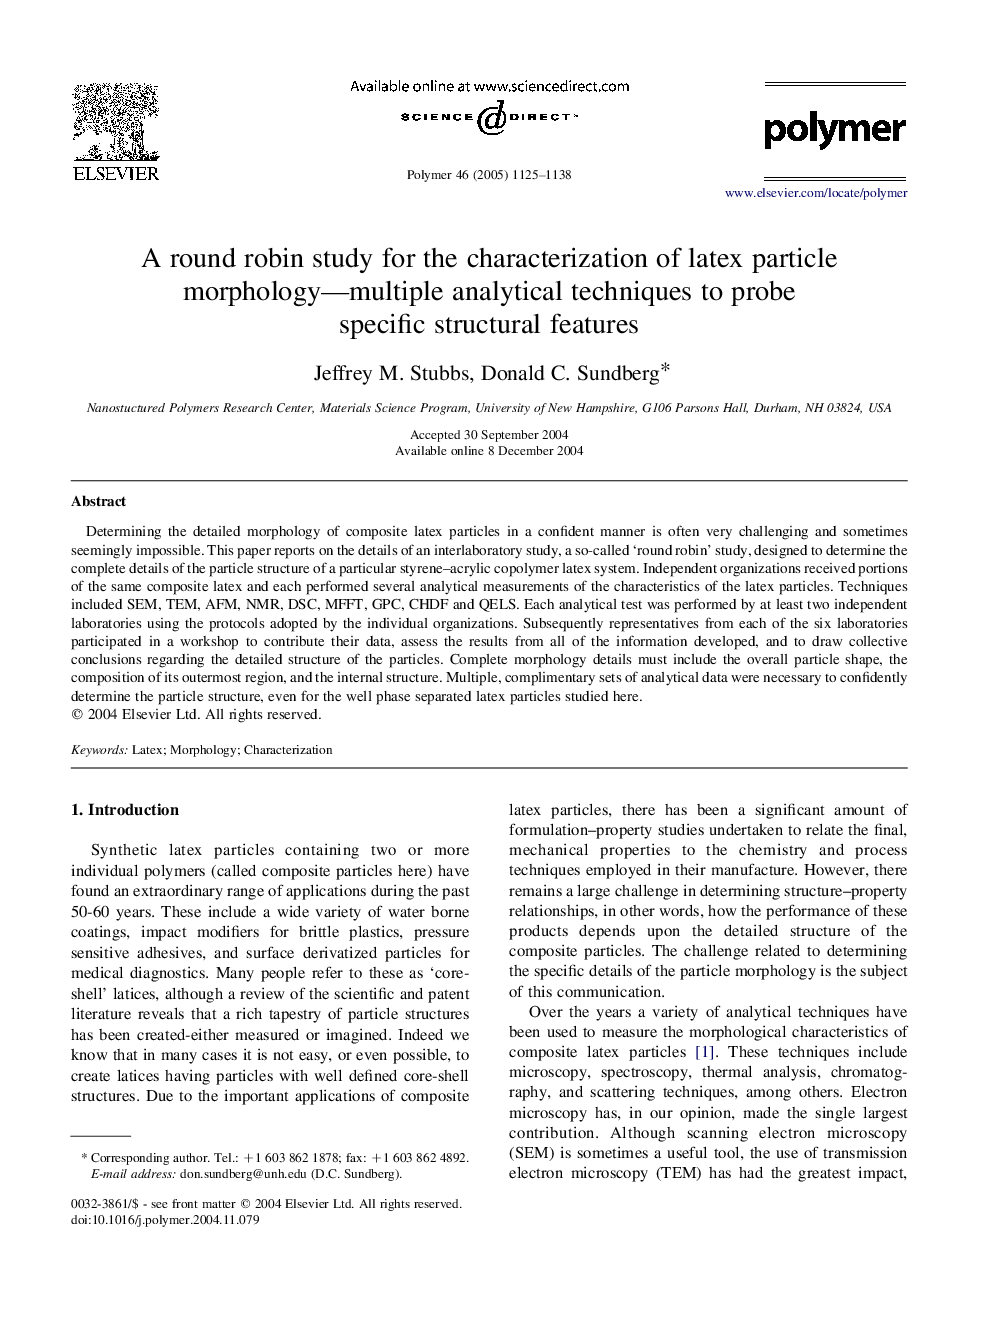 A round robin study for the characterization of latex particle morphology-multiple analytical techniques to probe specific structural features